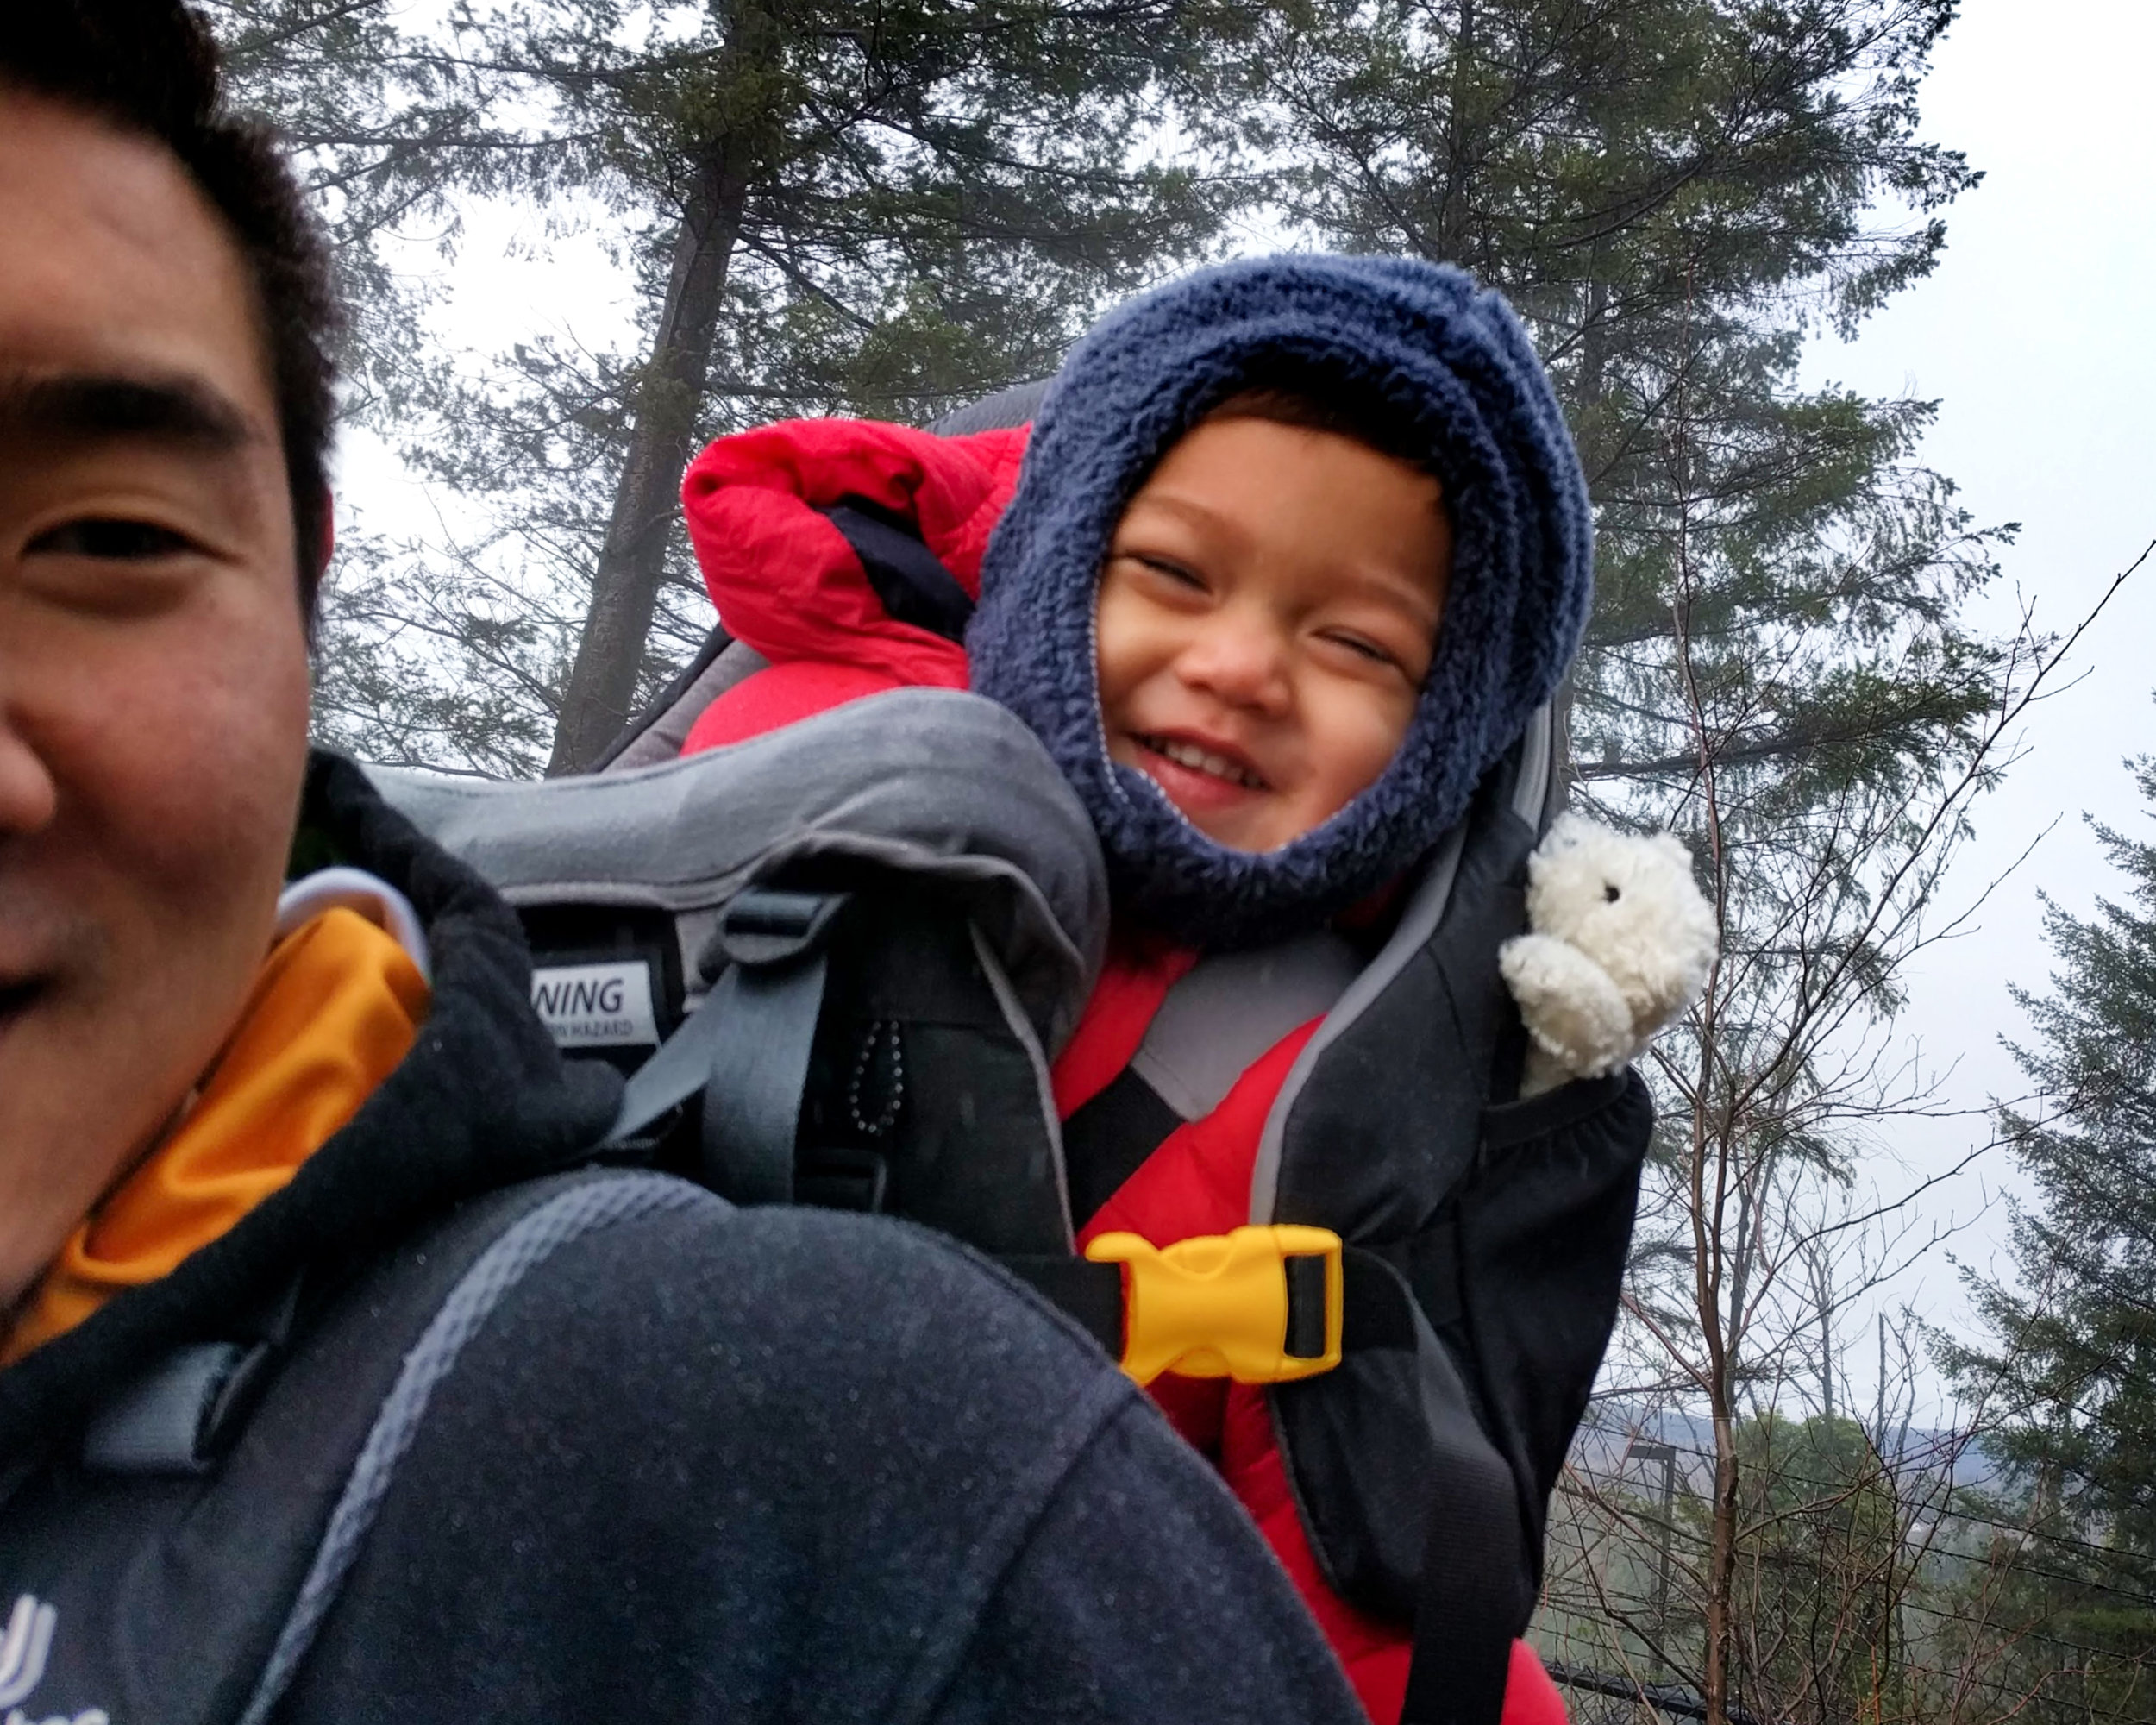  Steve & Elden (23 months old) excited to be outside hiking again 